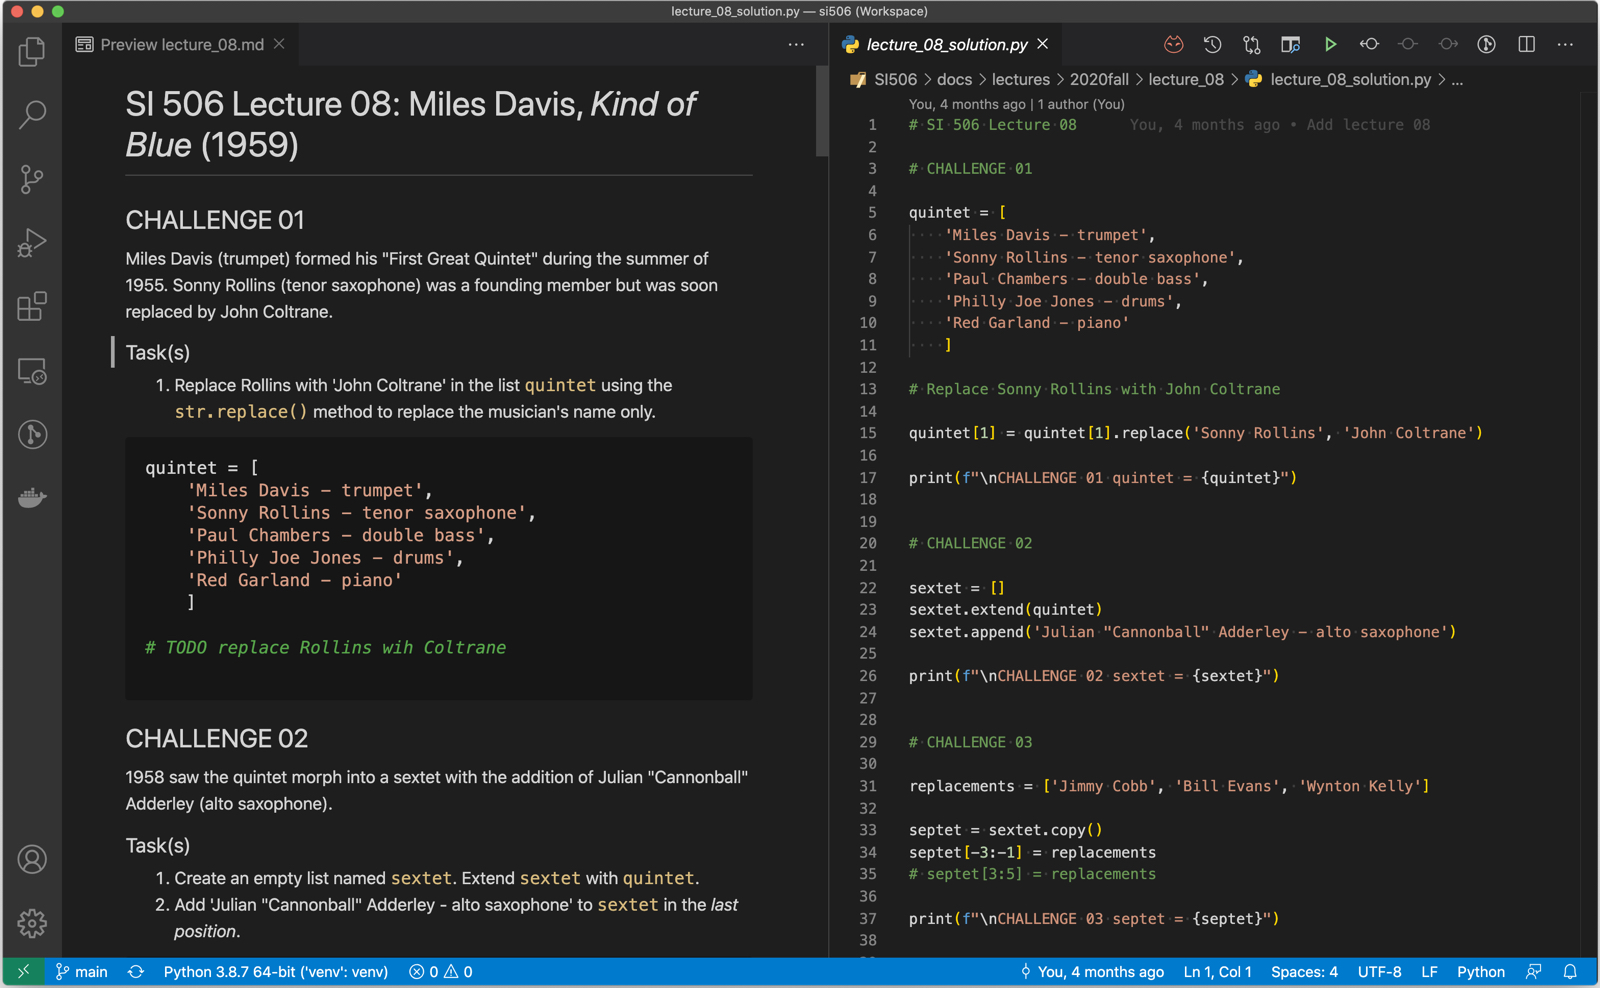 SI 506 Lecture 08 Challenge in VS Code